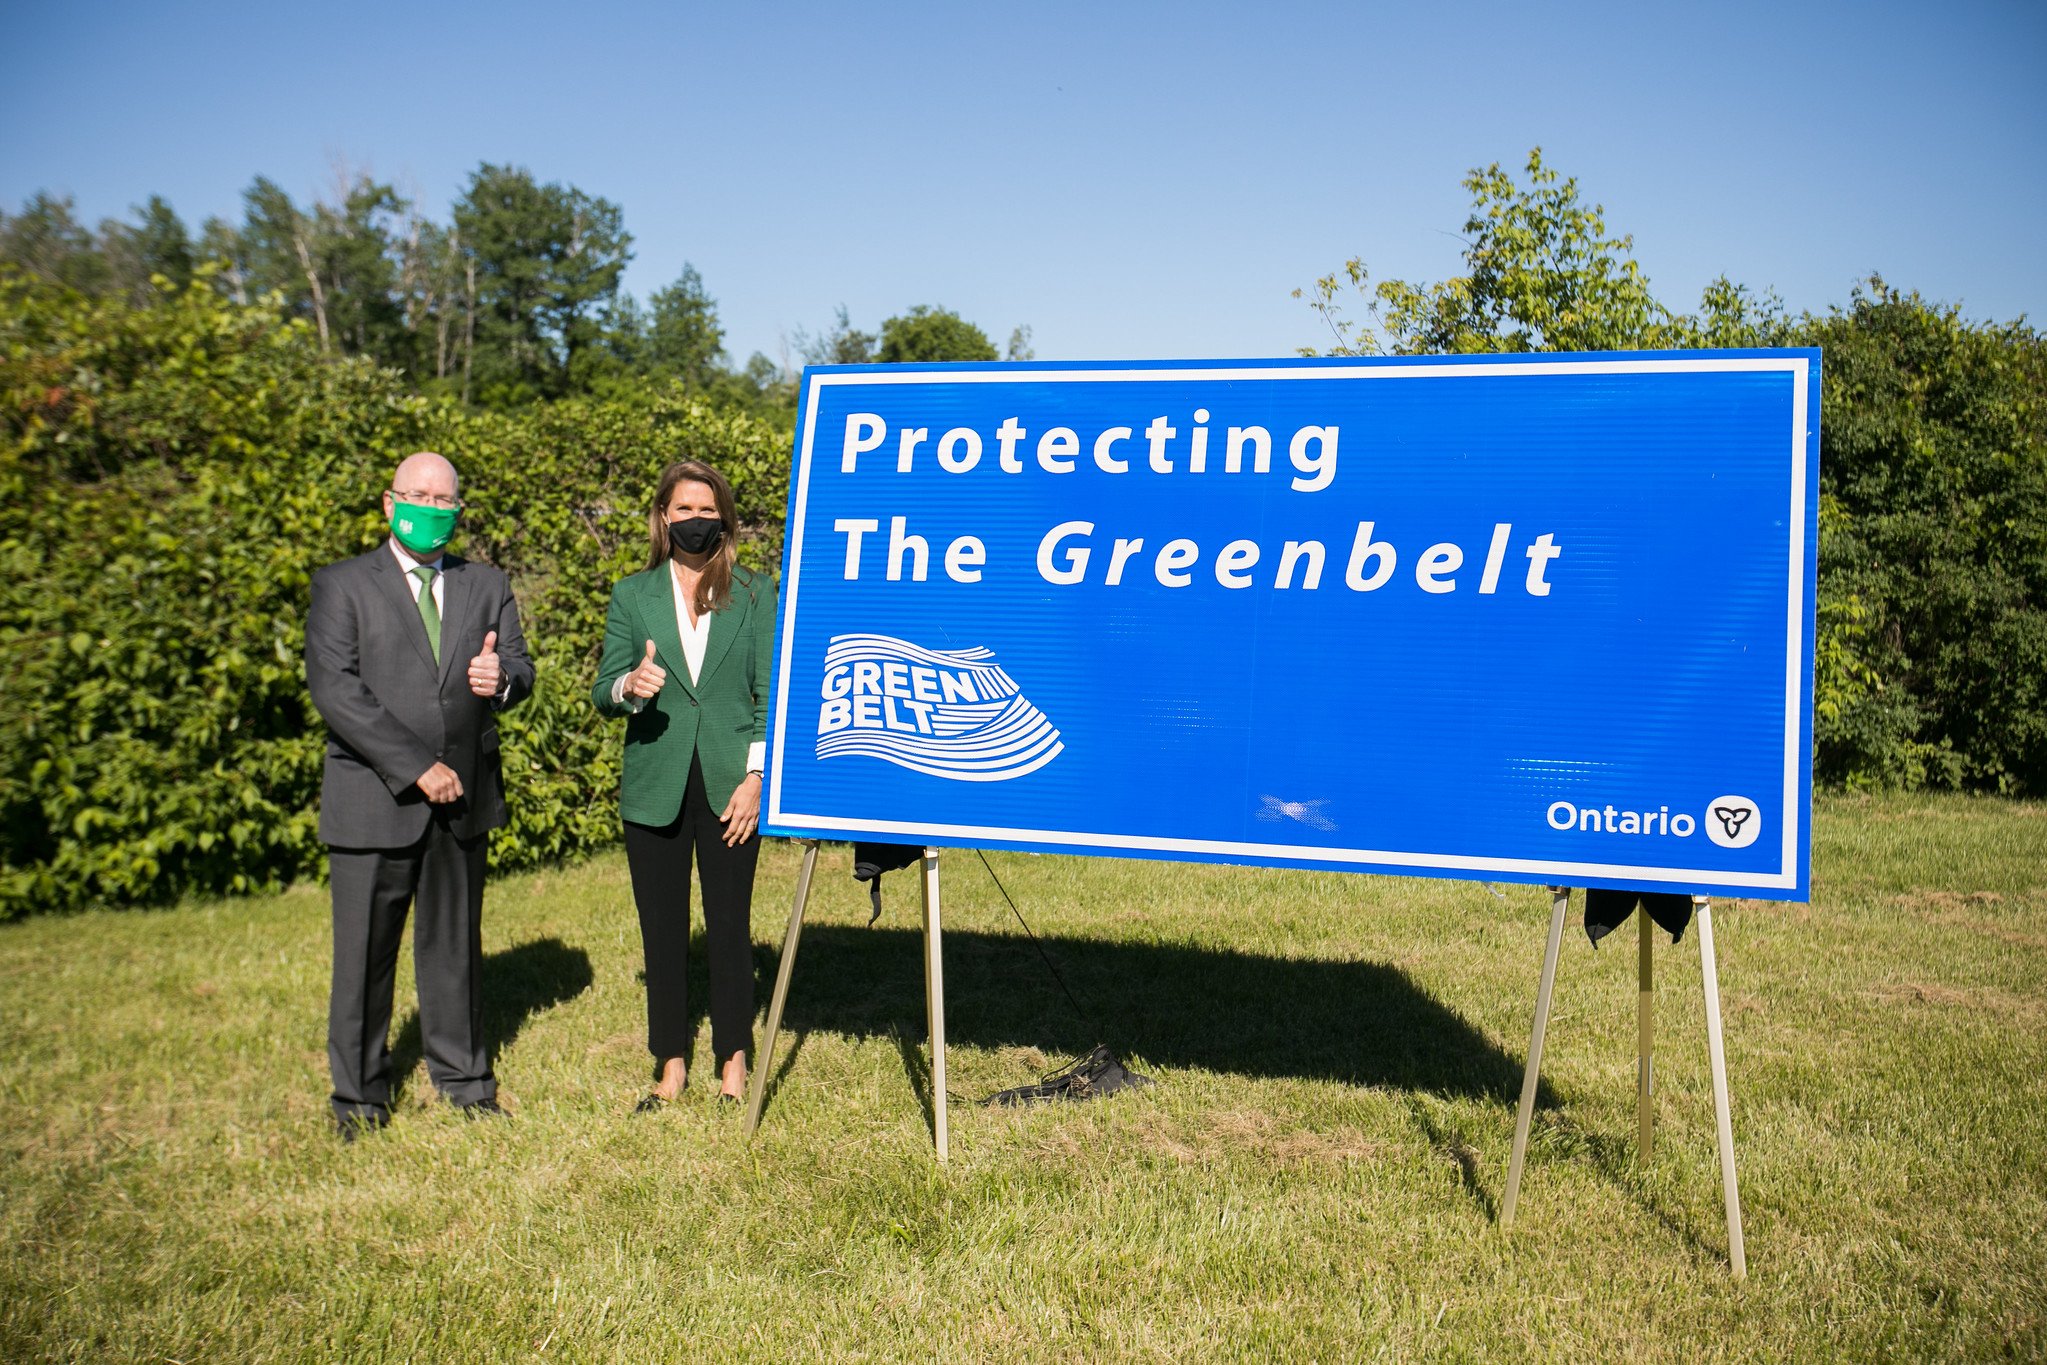 Ontario Municipal Affairs Minister Steve Clark and Transportation Minister Caroline Mulroney, both wearing masks, pose with thumbs up next to a sign that says "Protecting the Greenbelt." Mulroney is spearheading Highway 413.